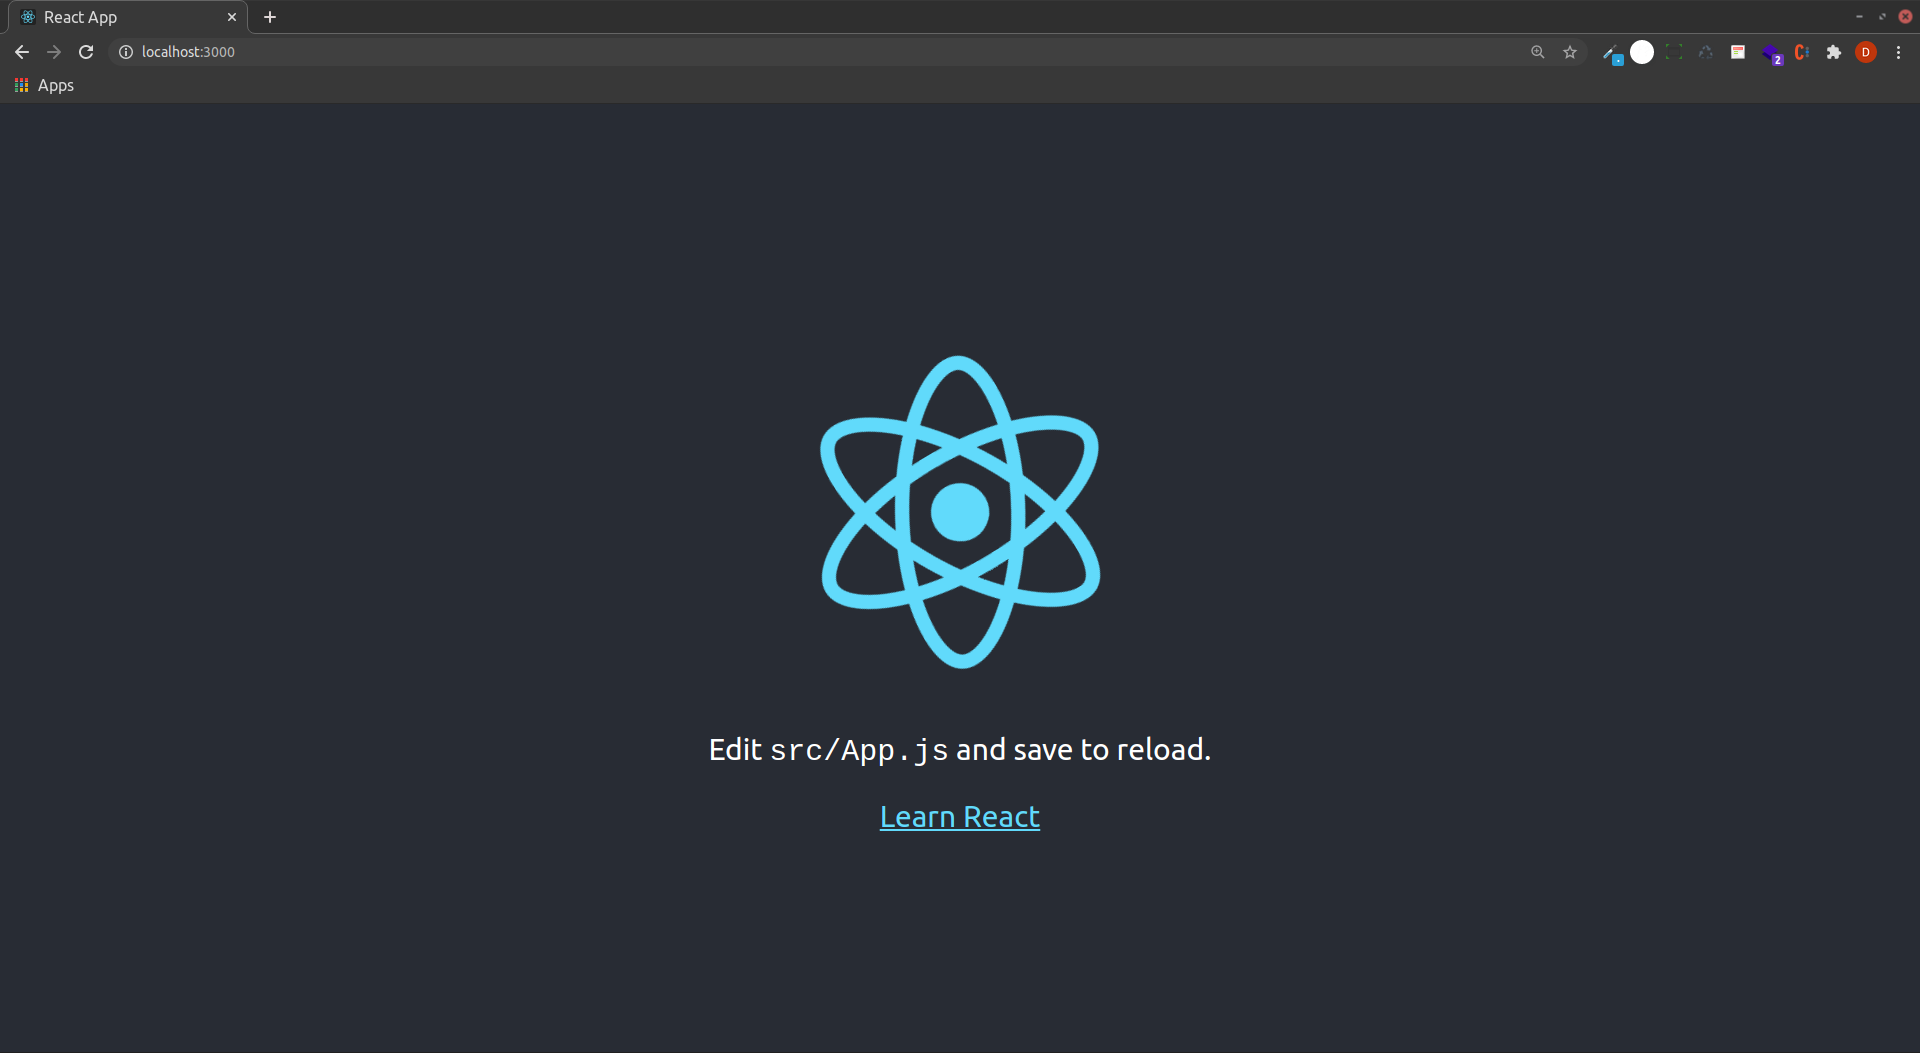 Screencapture of the React application's initial startup display in the browser